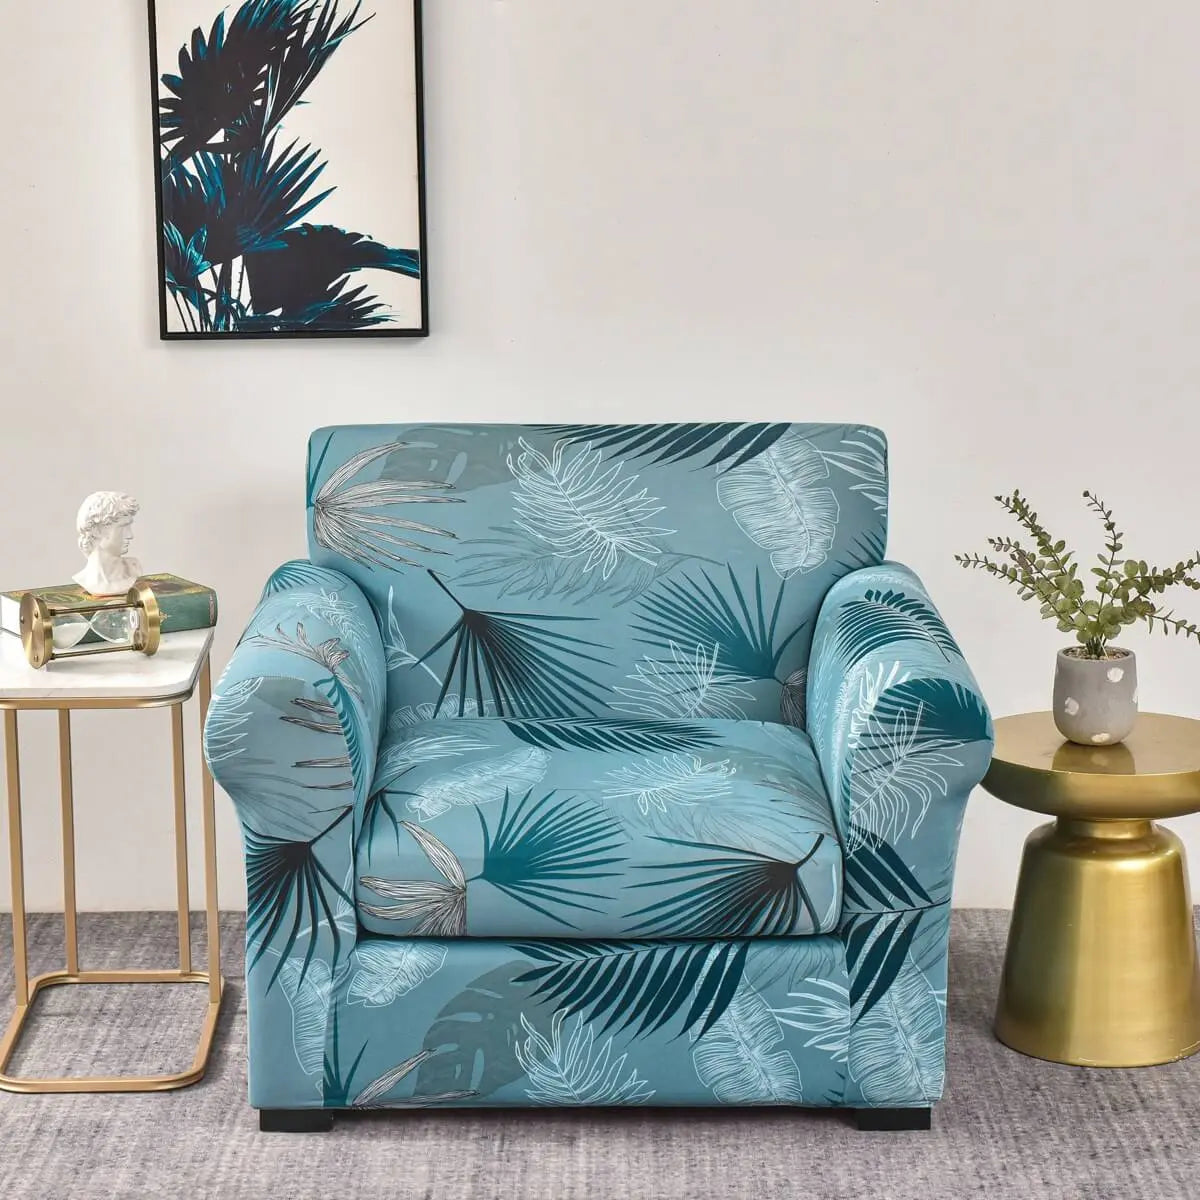 Crfatop Stretch Armchair Cover Slipcovers for 1 Seater Chair Slip Cover Teal